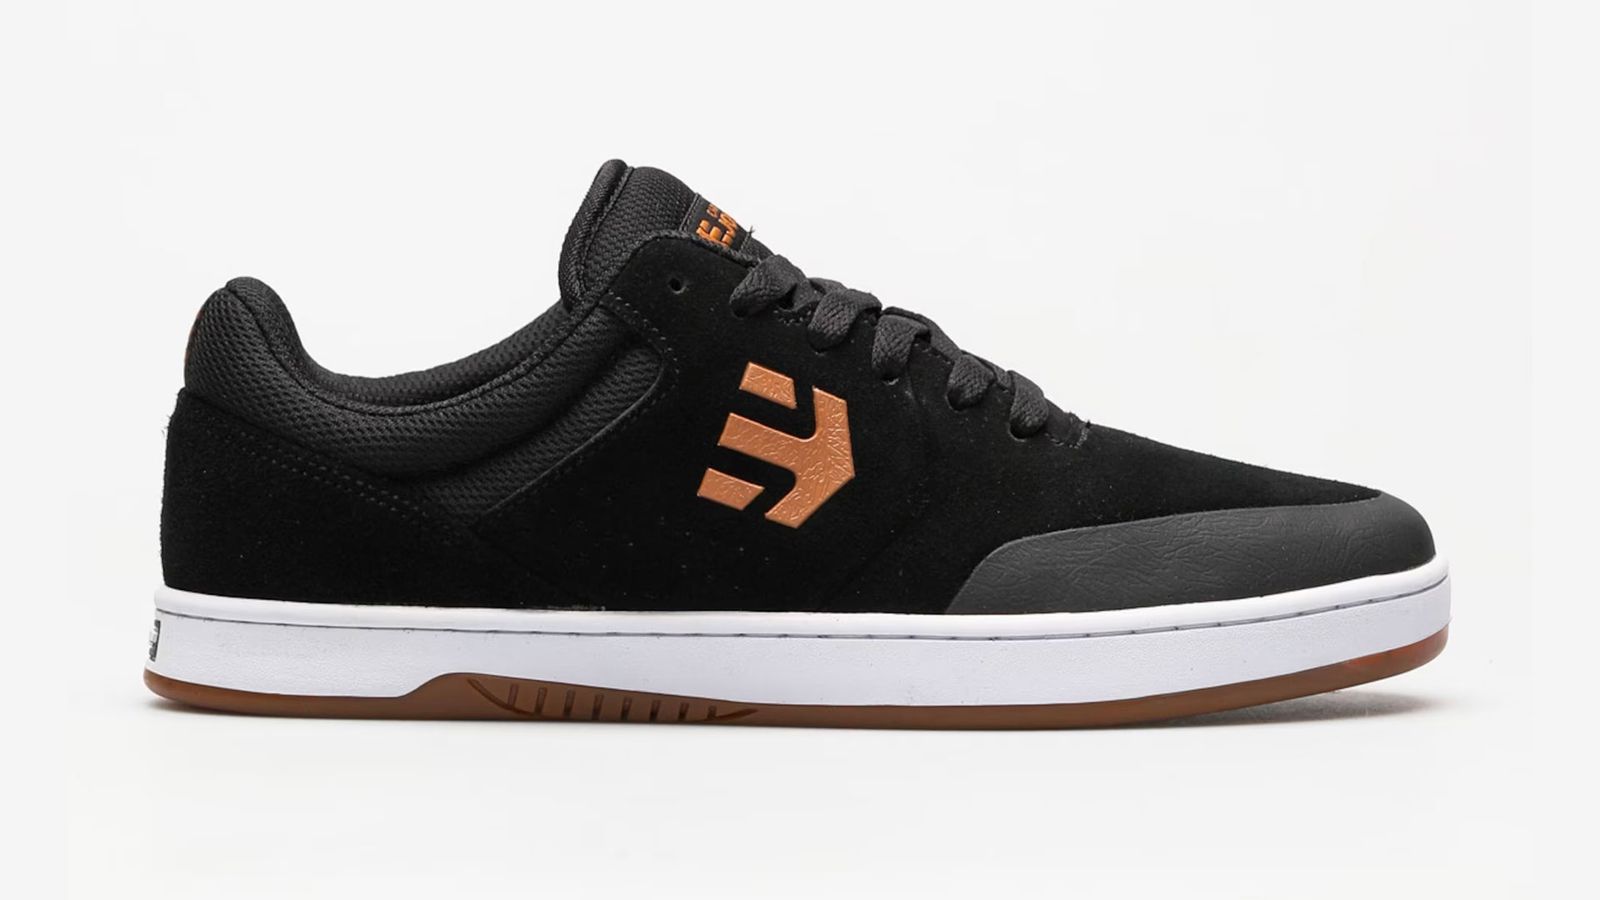 etnies Marana Michelin product image of a black sneaker with a white midsole and tan accents.